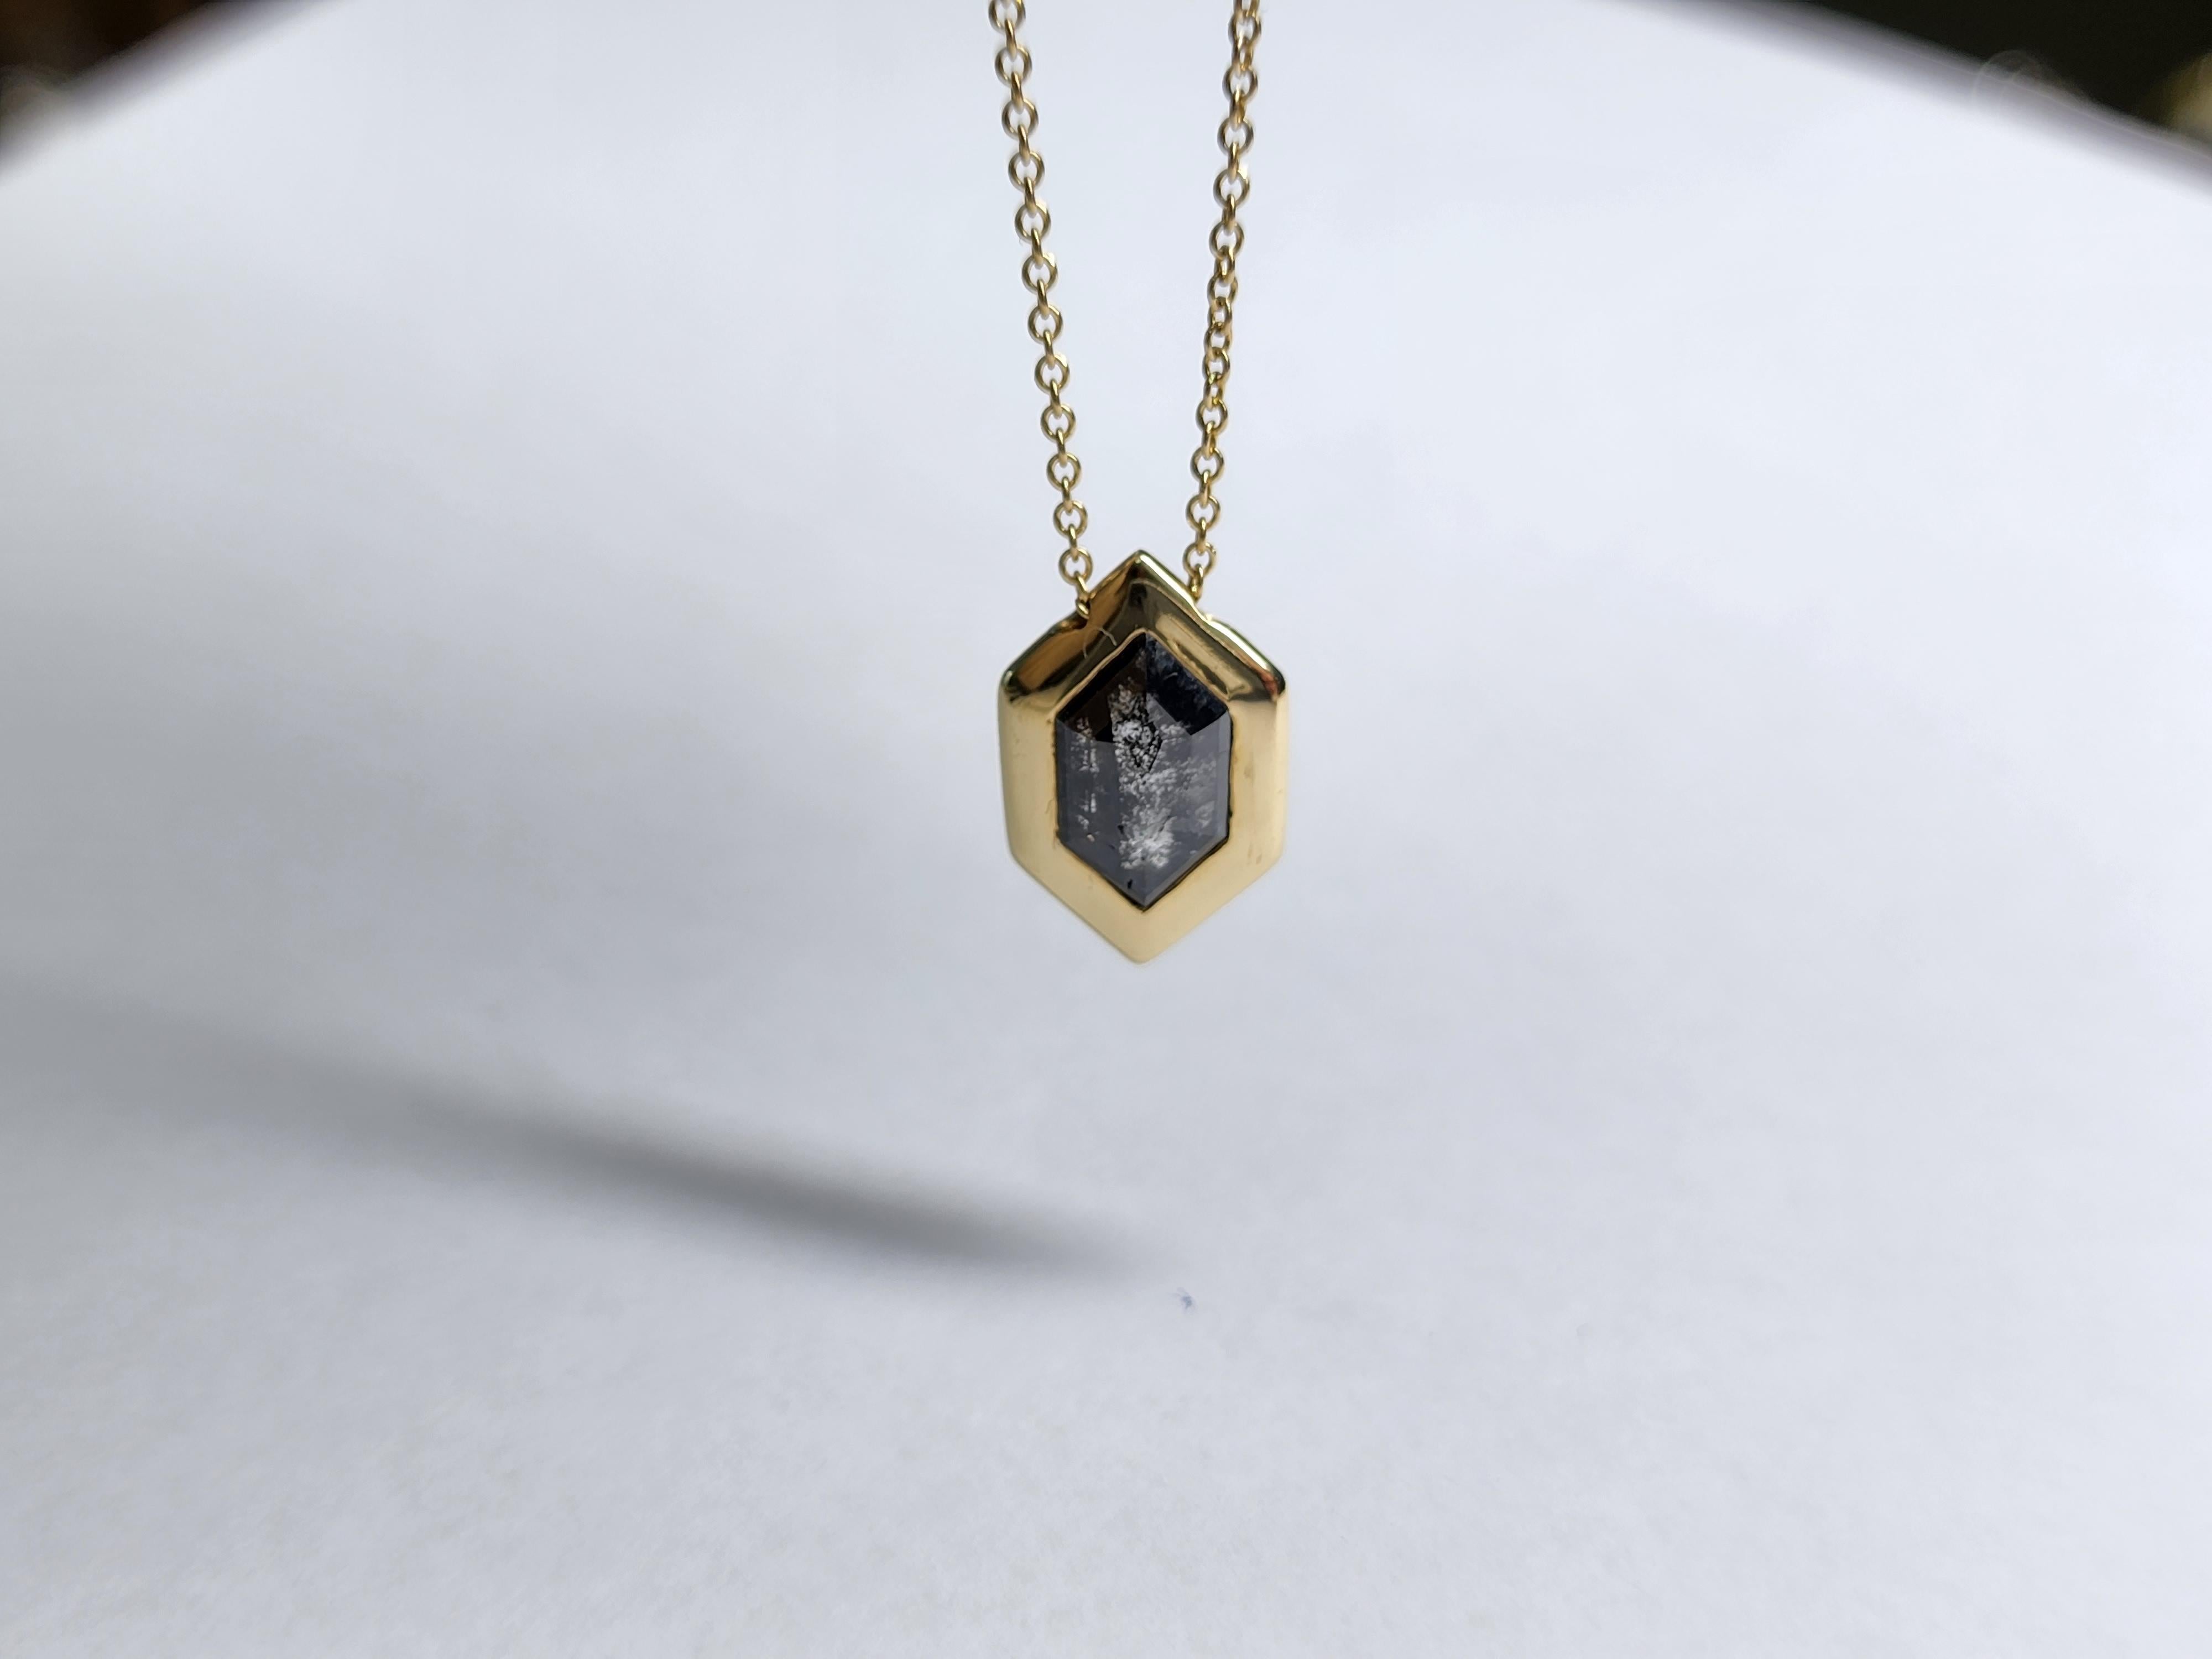 Exclusive 1.65Ct Salt & Pepper Diamond Hexagon Shape 14K Yellow Gold Pendant and Necklace

Product Description:

Experience the allure of our Salt & Pepper Diamond Necklace, a masterful blend of contemporary design and rare beauty. This exclusive